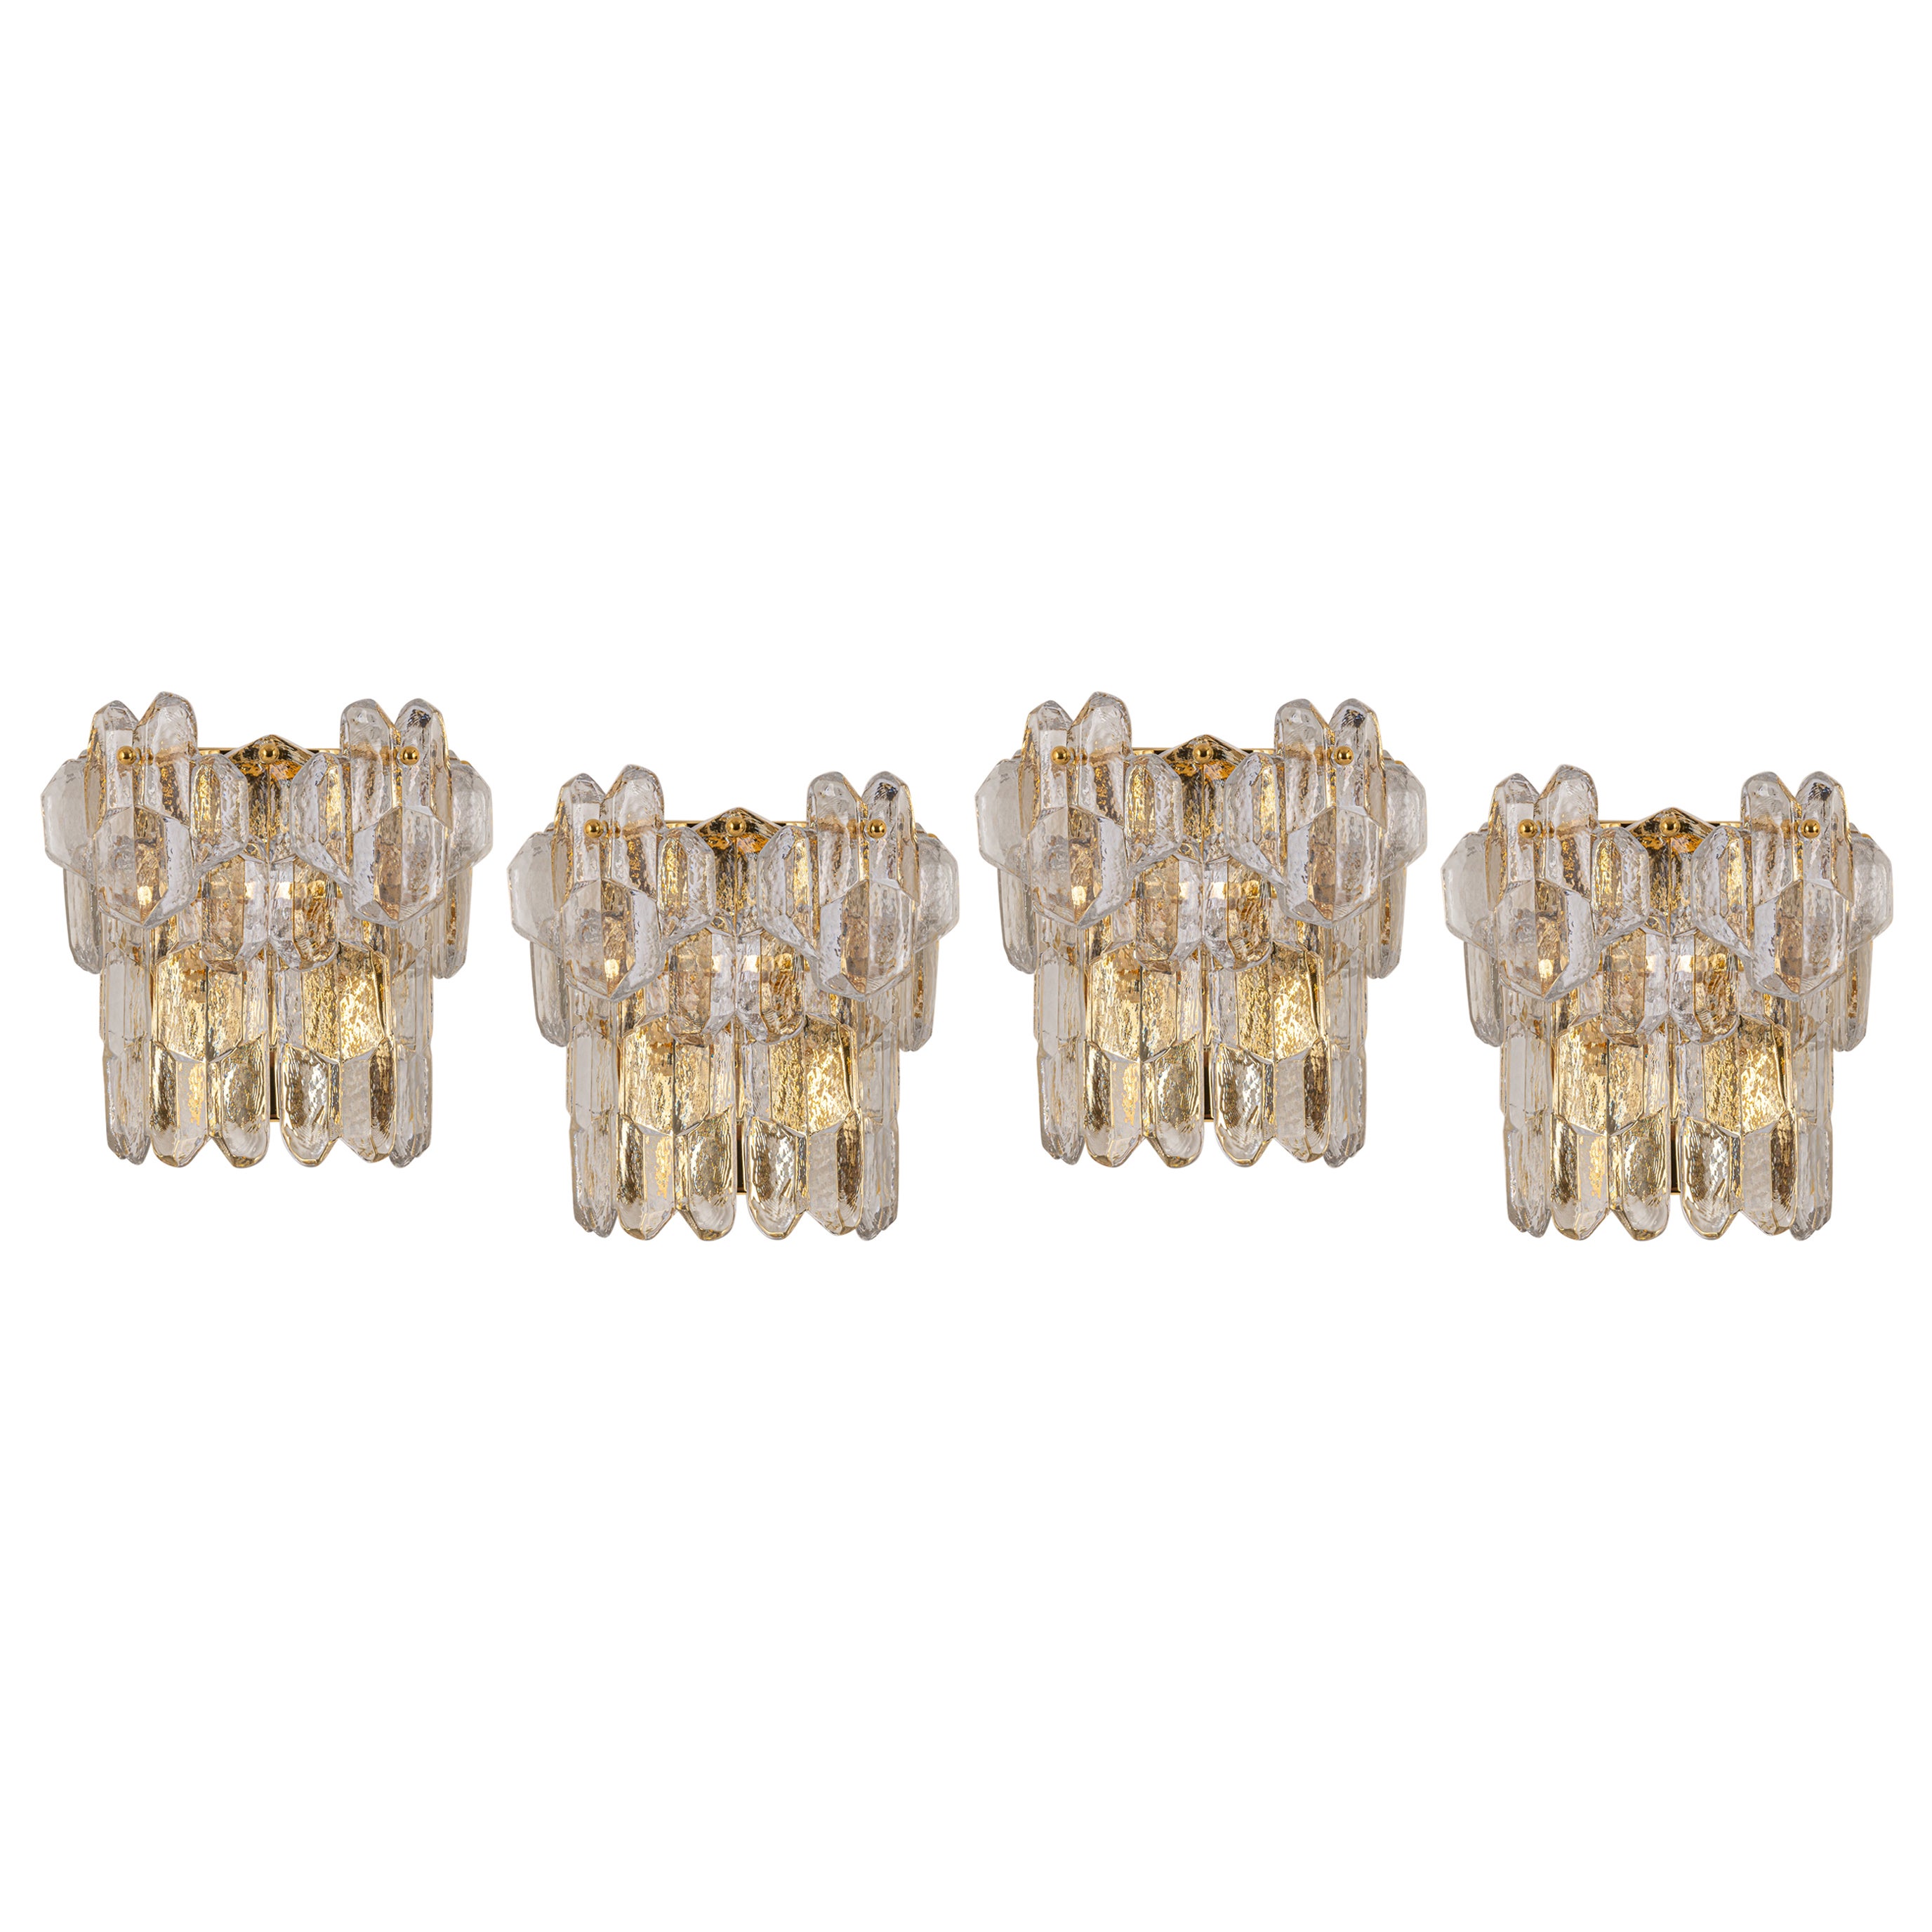 Wonderful pair of mid-century wall sconces with nine murano glass pieces, made by Kalmar, Austria, manufactured, circa 1960-1969.
2 Pairs are available.
High quality and in very good condition. Cleaned, well-wired and ready to use. 

Each